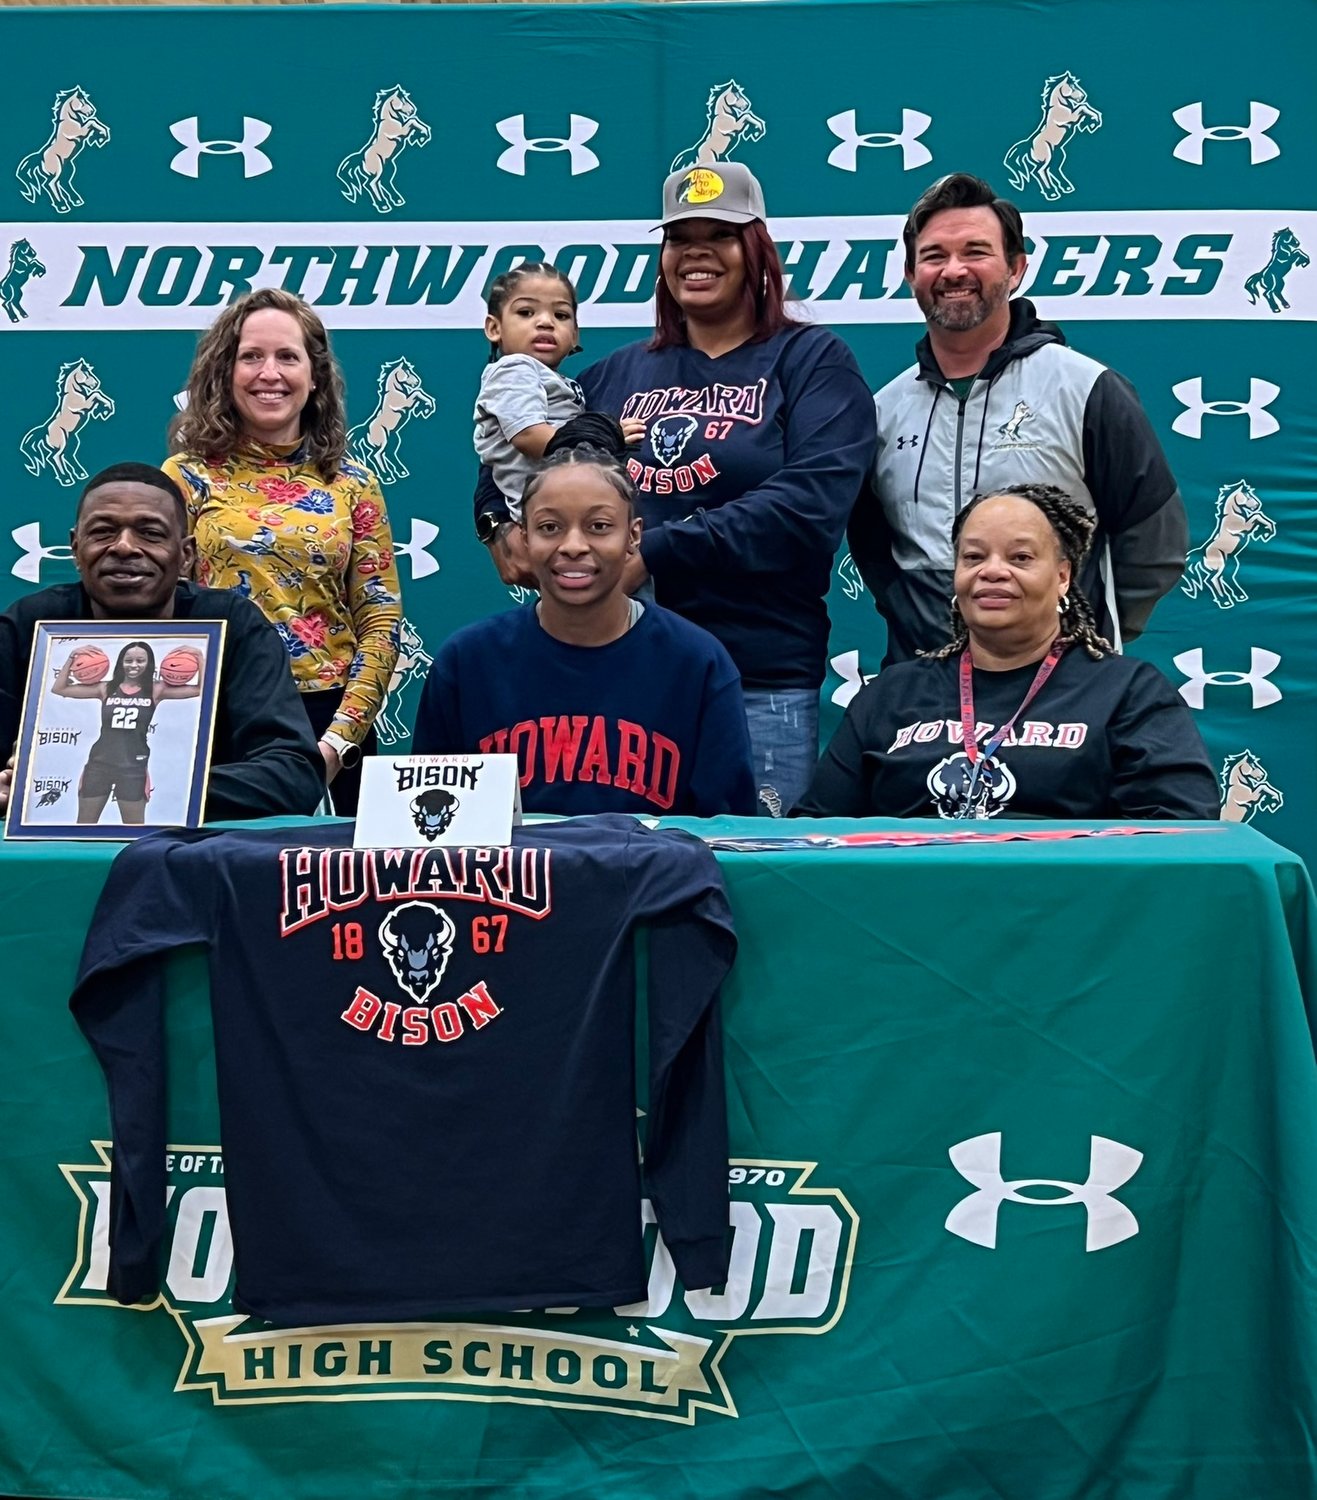 Northwood senior Te'Keyah Bland will play college basketball at Howard, which won the MEAC Conference championship in 2021-22.